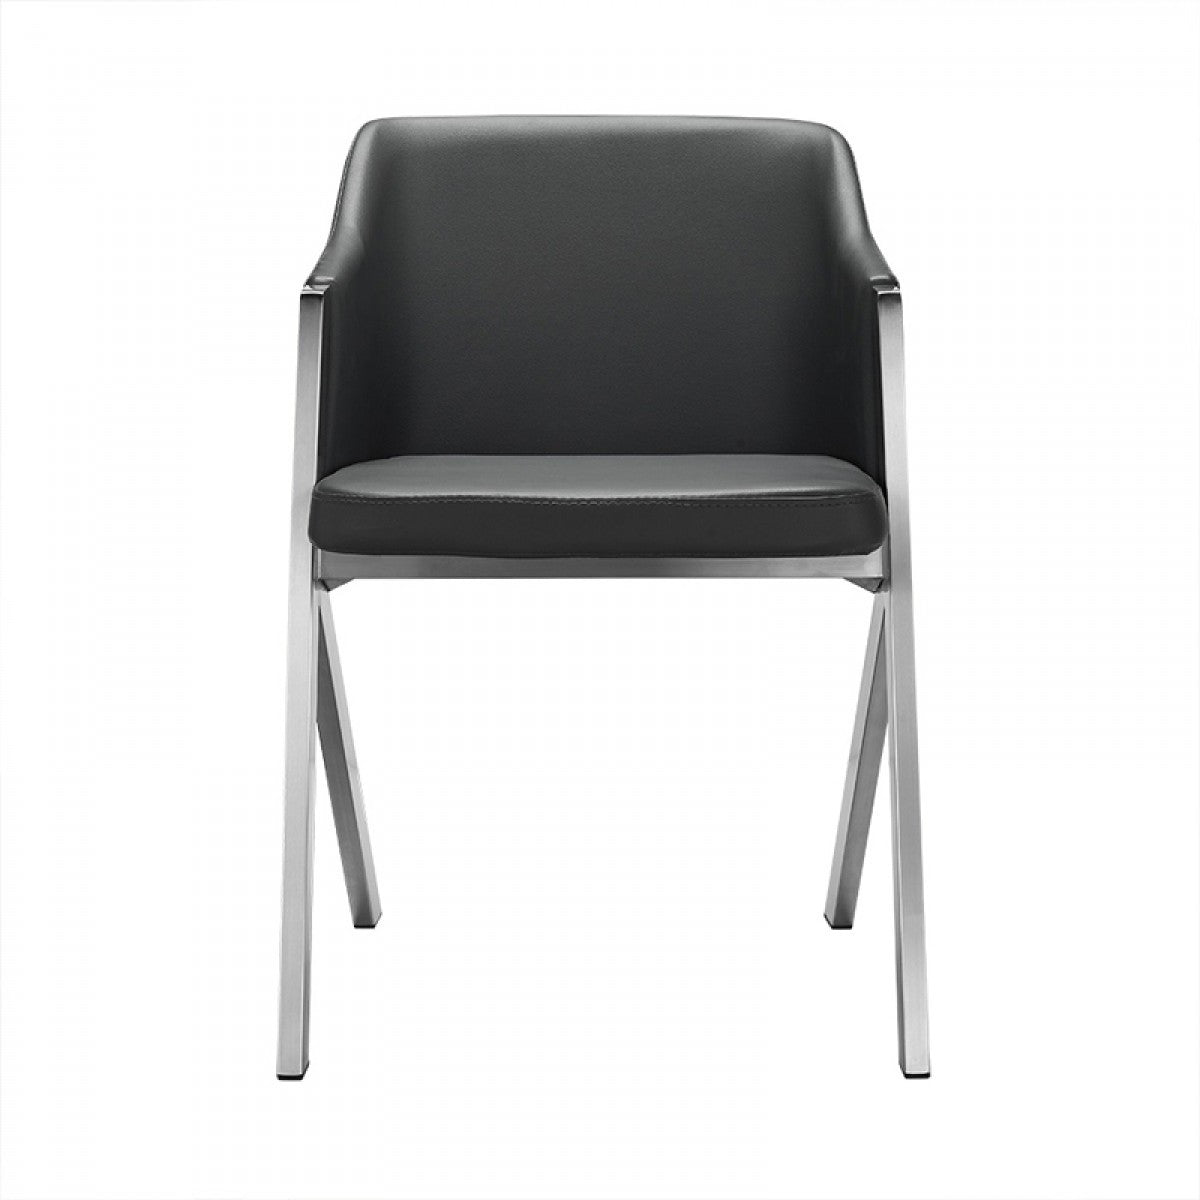 Darcy - Modern Grey Leatherette Dining Chair (Set of 2)